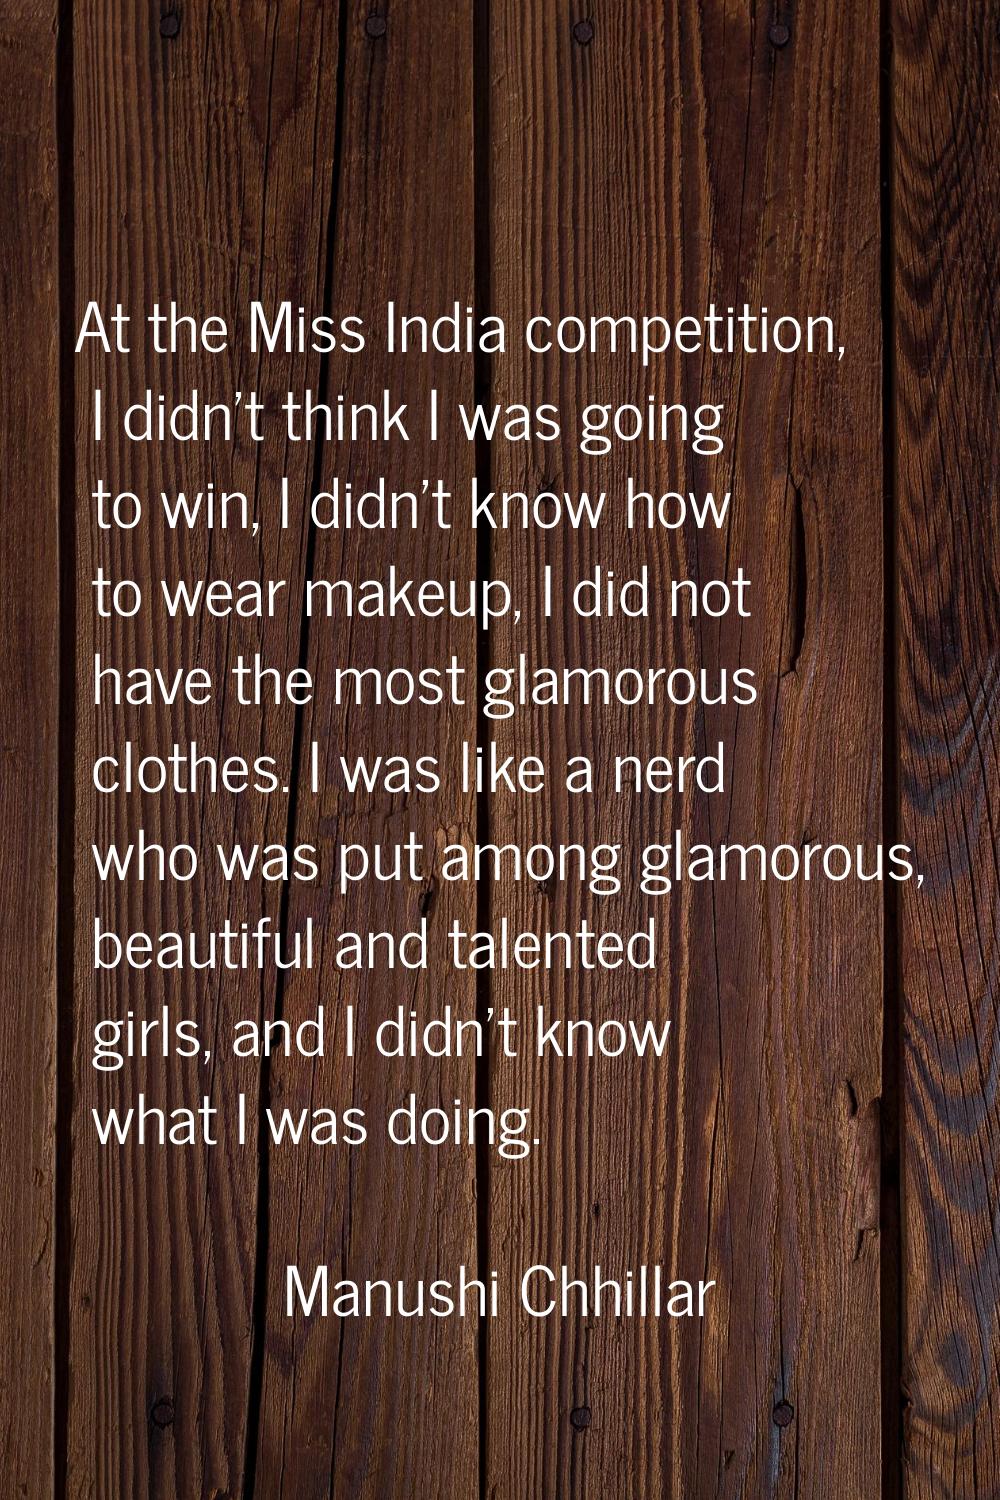 At the Miss India competition, I didn't think I was going to win, I didn't know how to wear makeup,